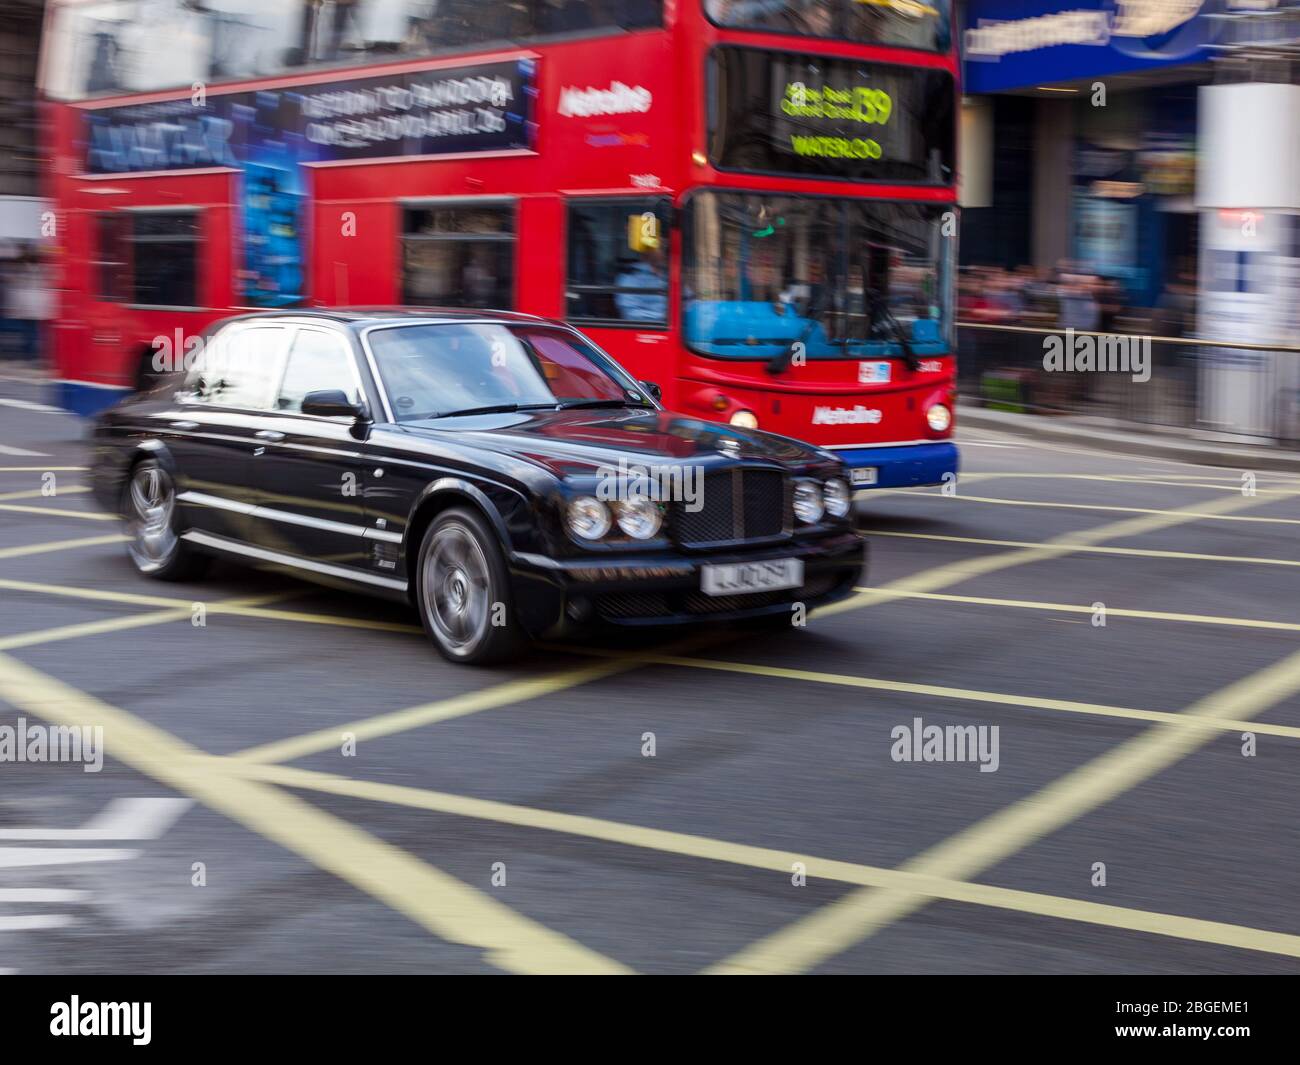 Rolls Royce car and Red London Bus cross Piccadilly Circus in Central London's West End District. Wealthy London / London Wealth. Motion Blur. Stock Photo